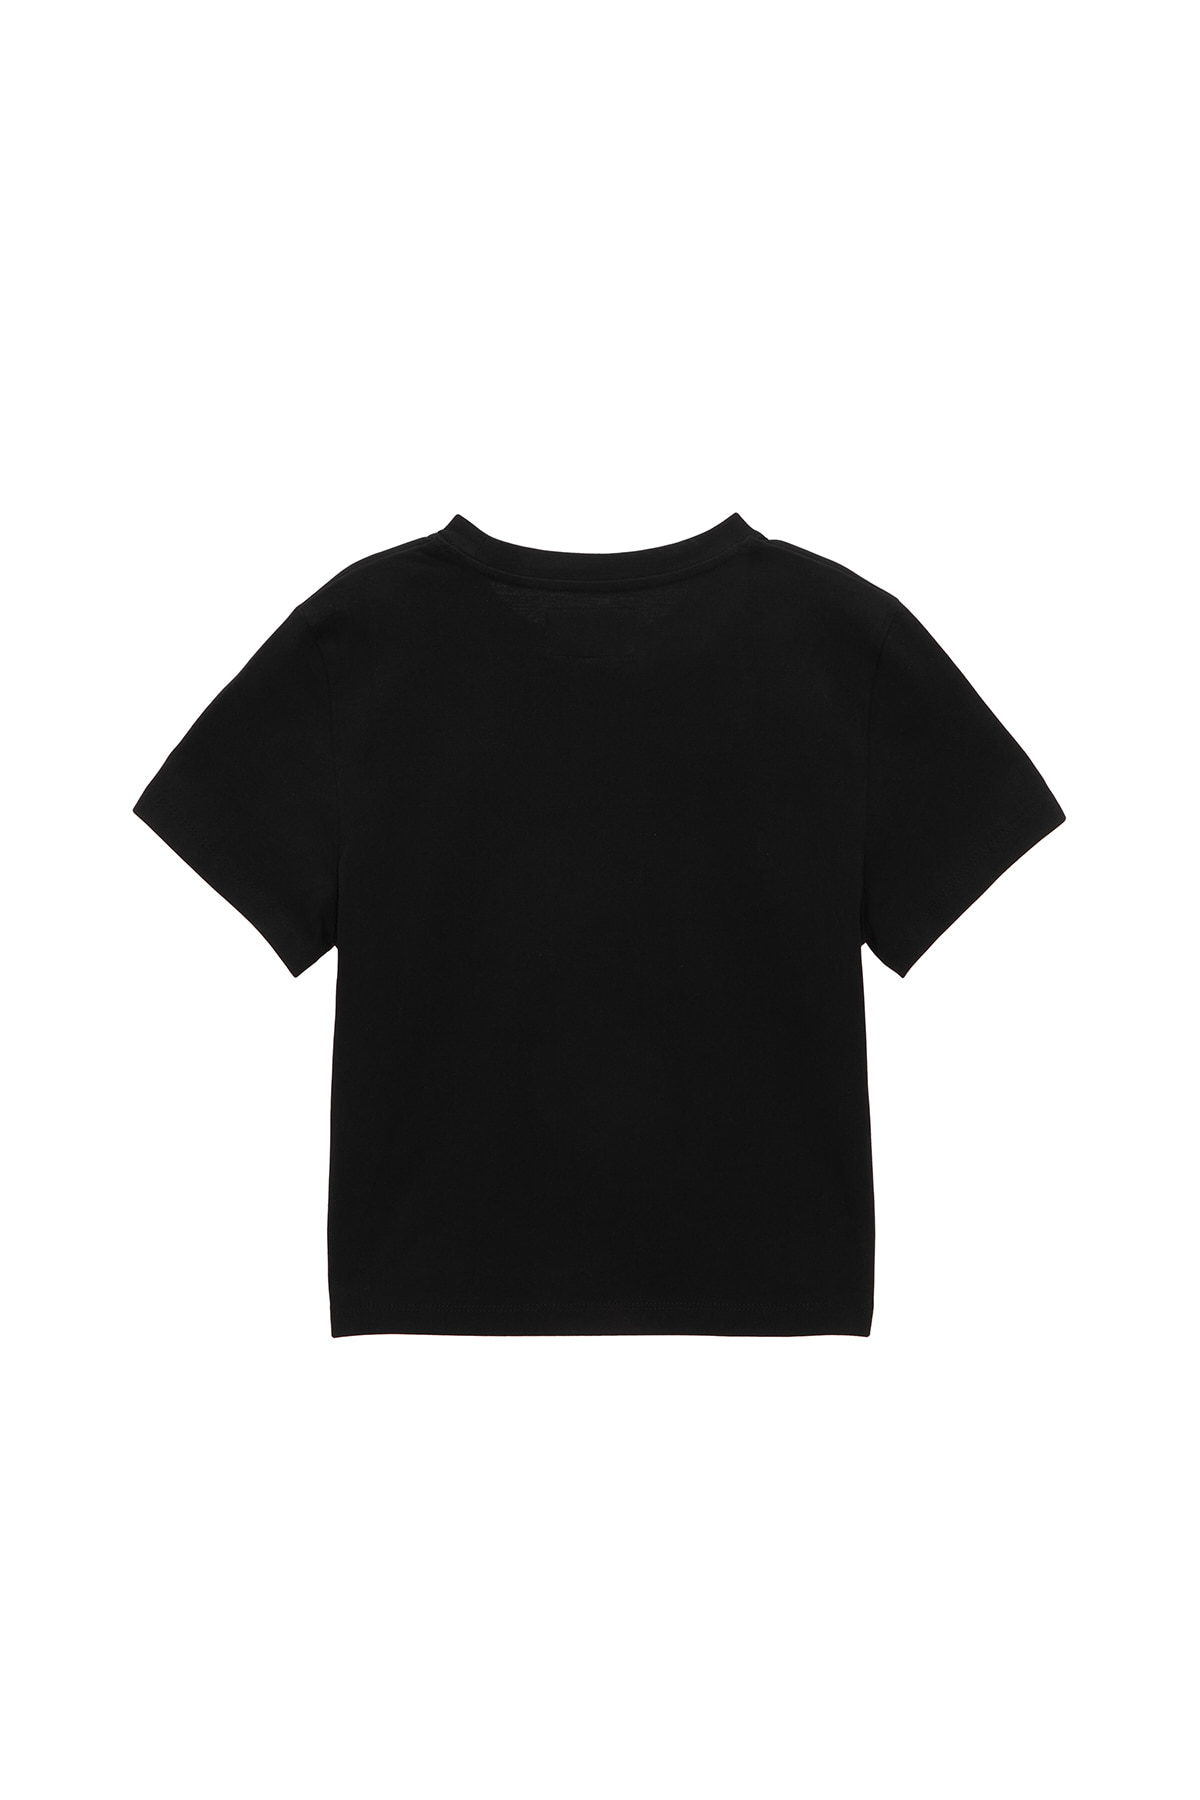 THIN TYPO TOP IN BLACK